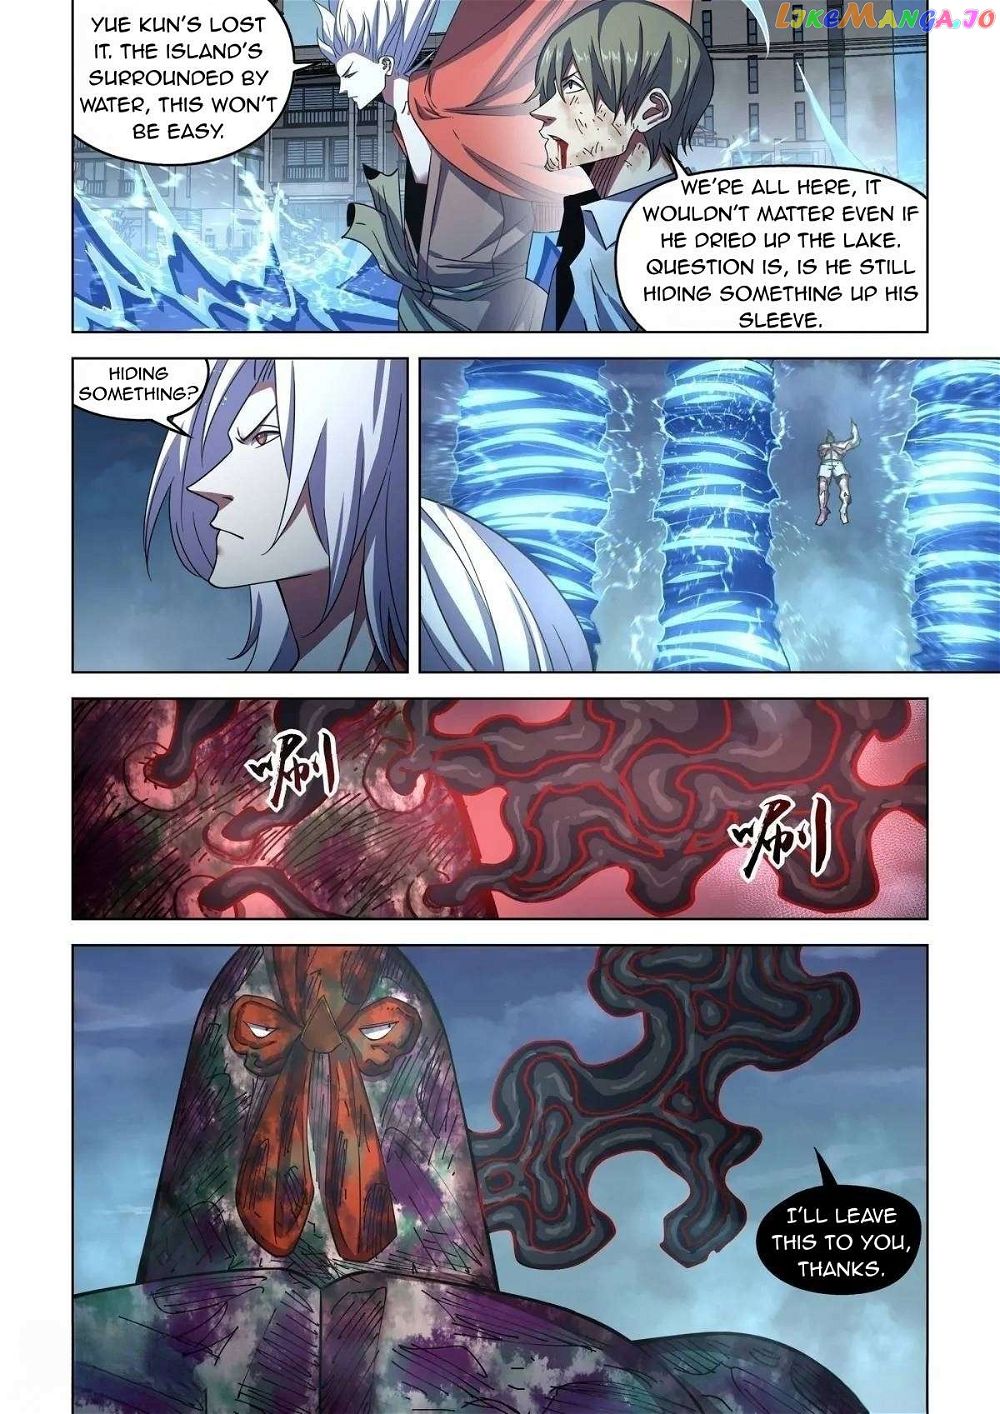 The Last Human Chapter 554 - Page 8